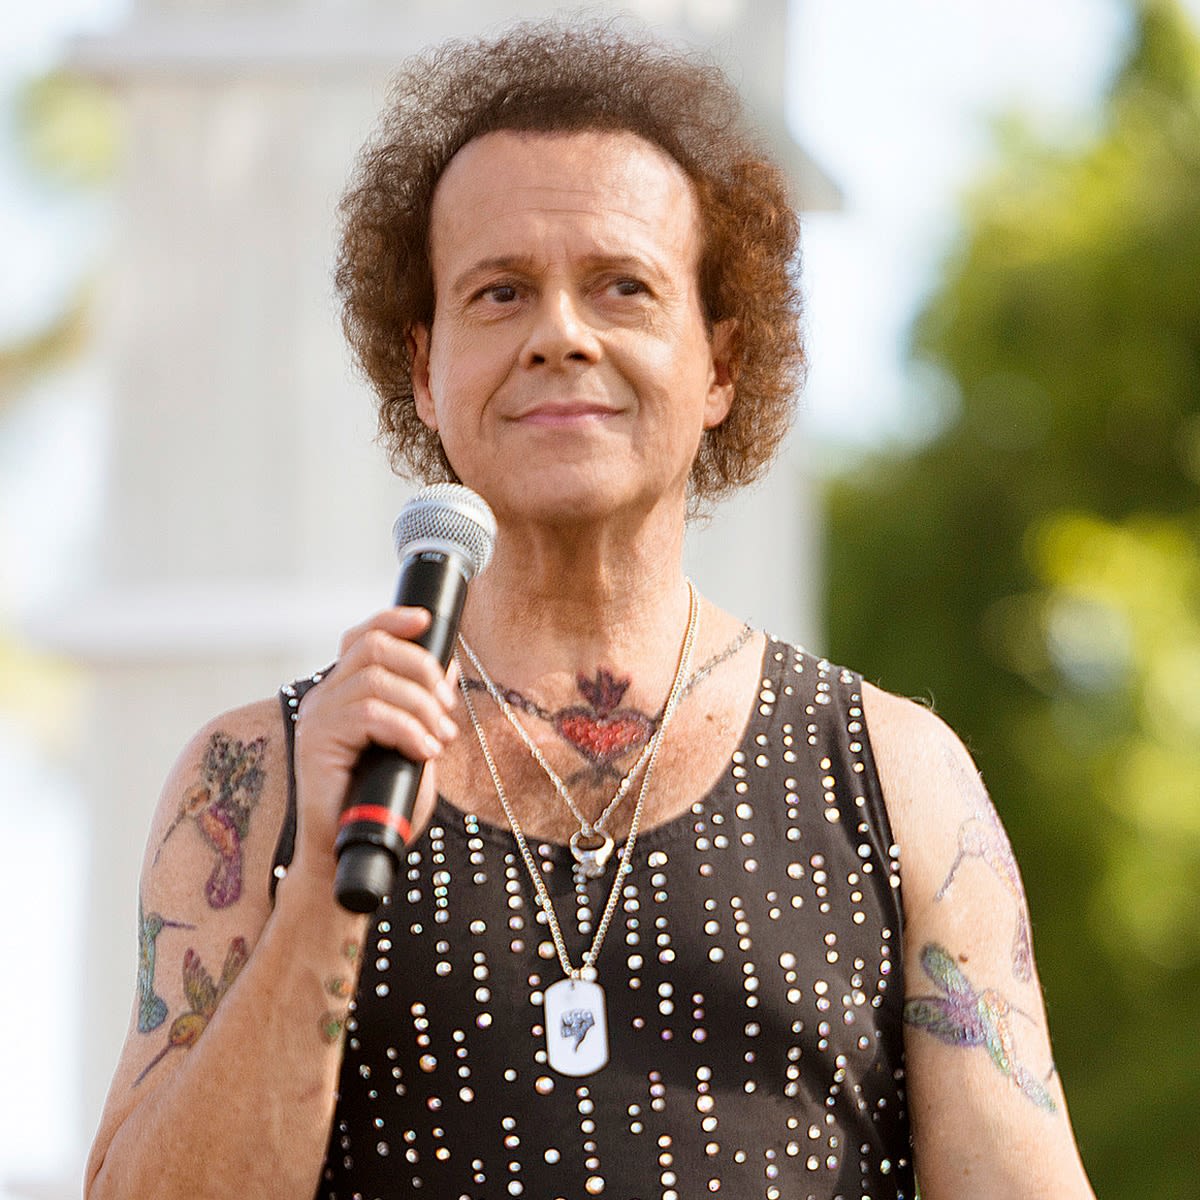 Richard Simmons Shared Moving Birthday Message One Day Before Death